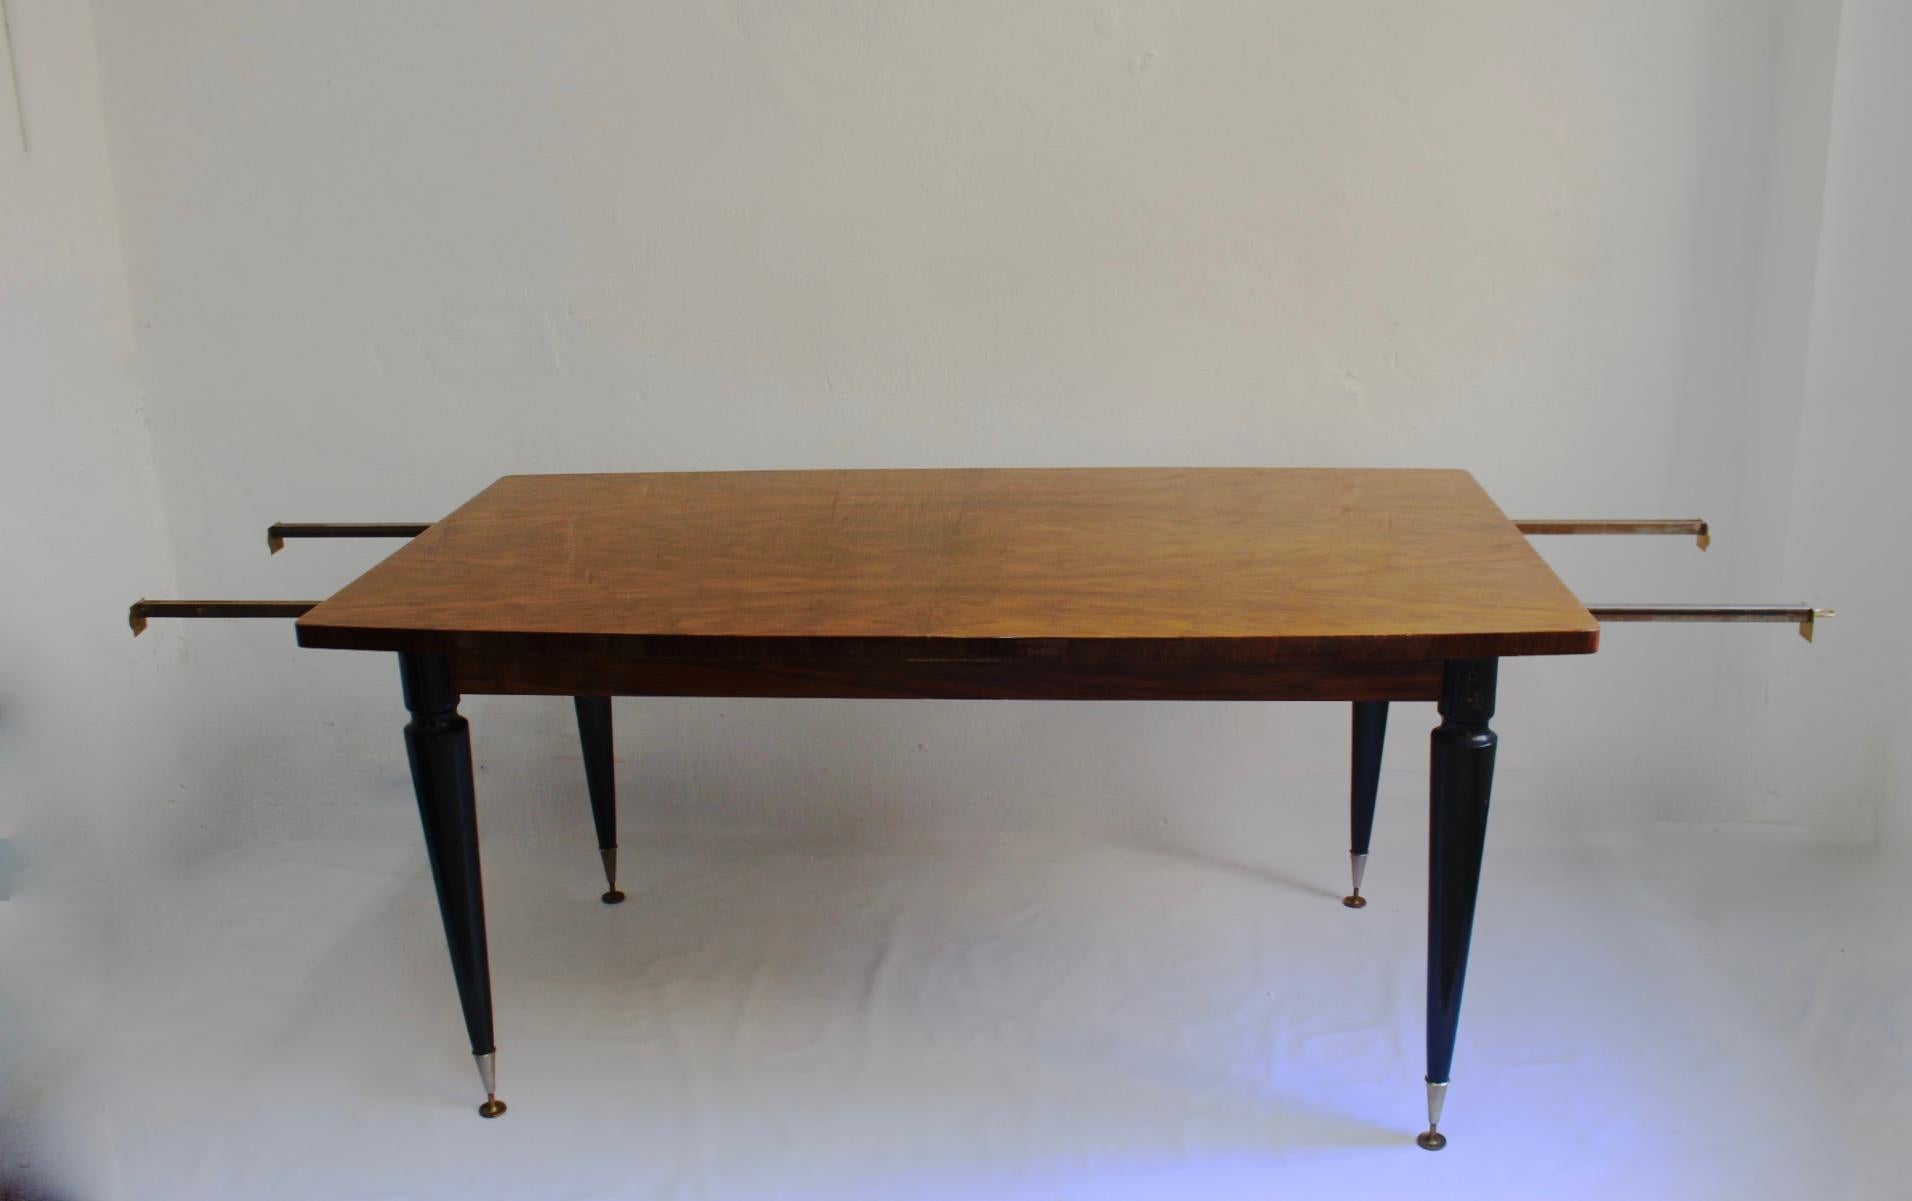 French Art Deco High Quality American Walnut Burl Extensible Dining Table, 1940s For Sale 3